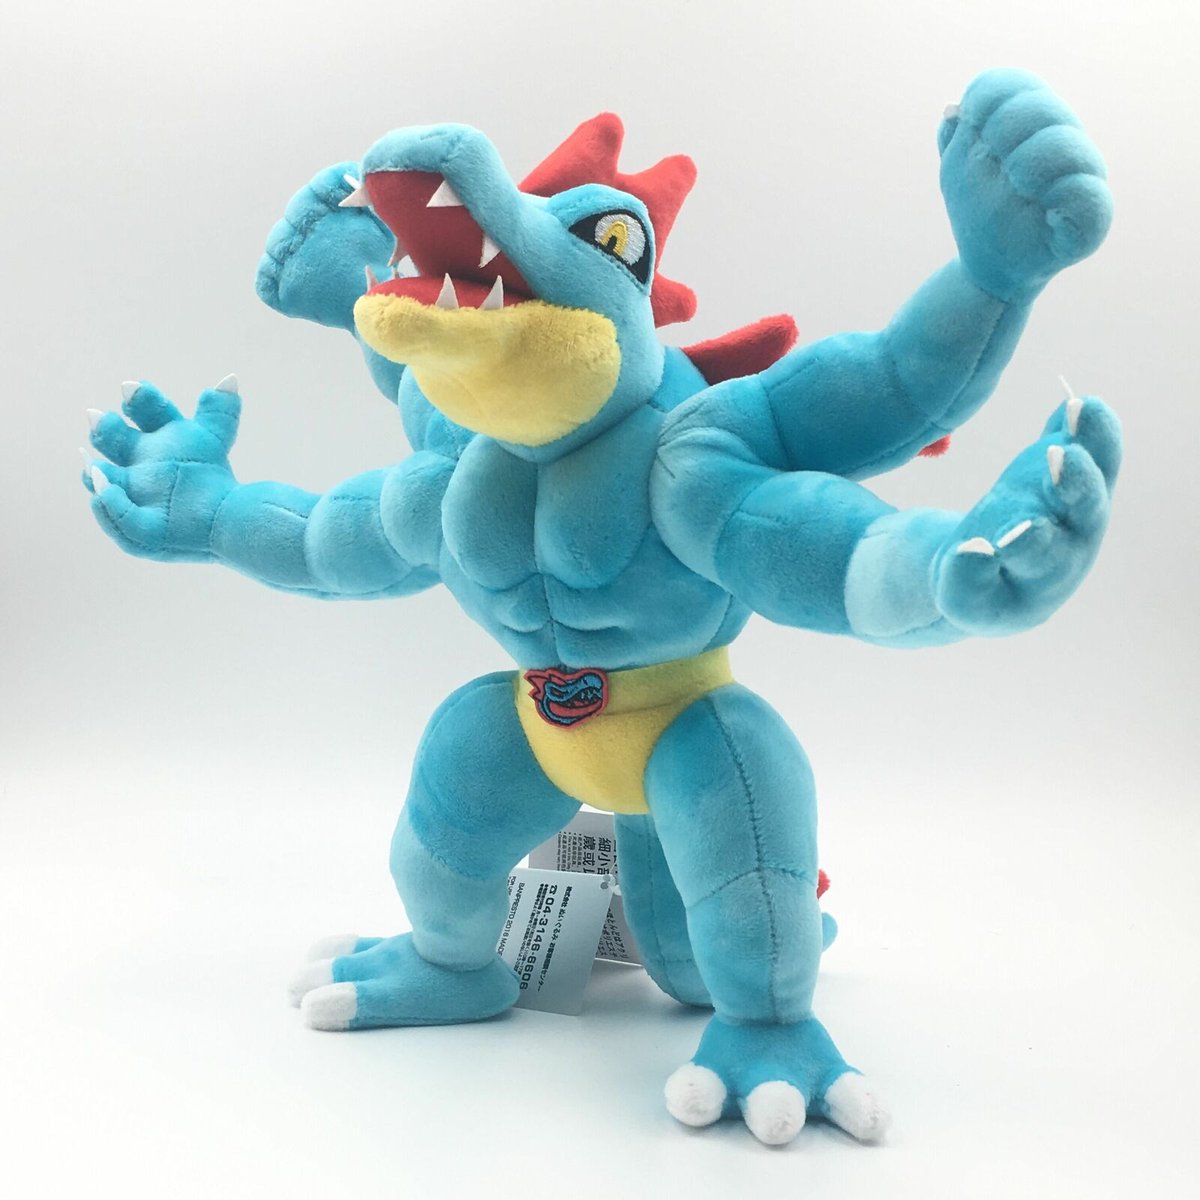 Hamish Steele Reviewspokemon I Was Searching For The Sleeping Totodile And Somehow Found This Inexplicable Feraligatr Machamp Mashup That Looks Weirdly Legit And I Obviously Bought One T Co Kdliuop5u8